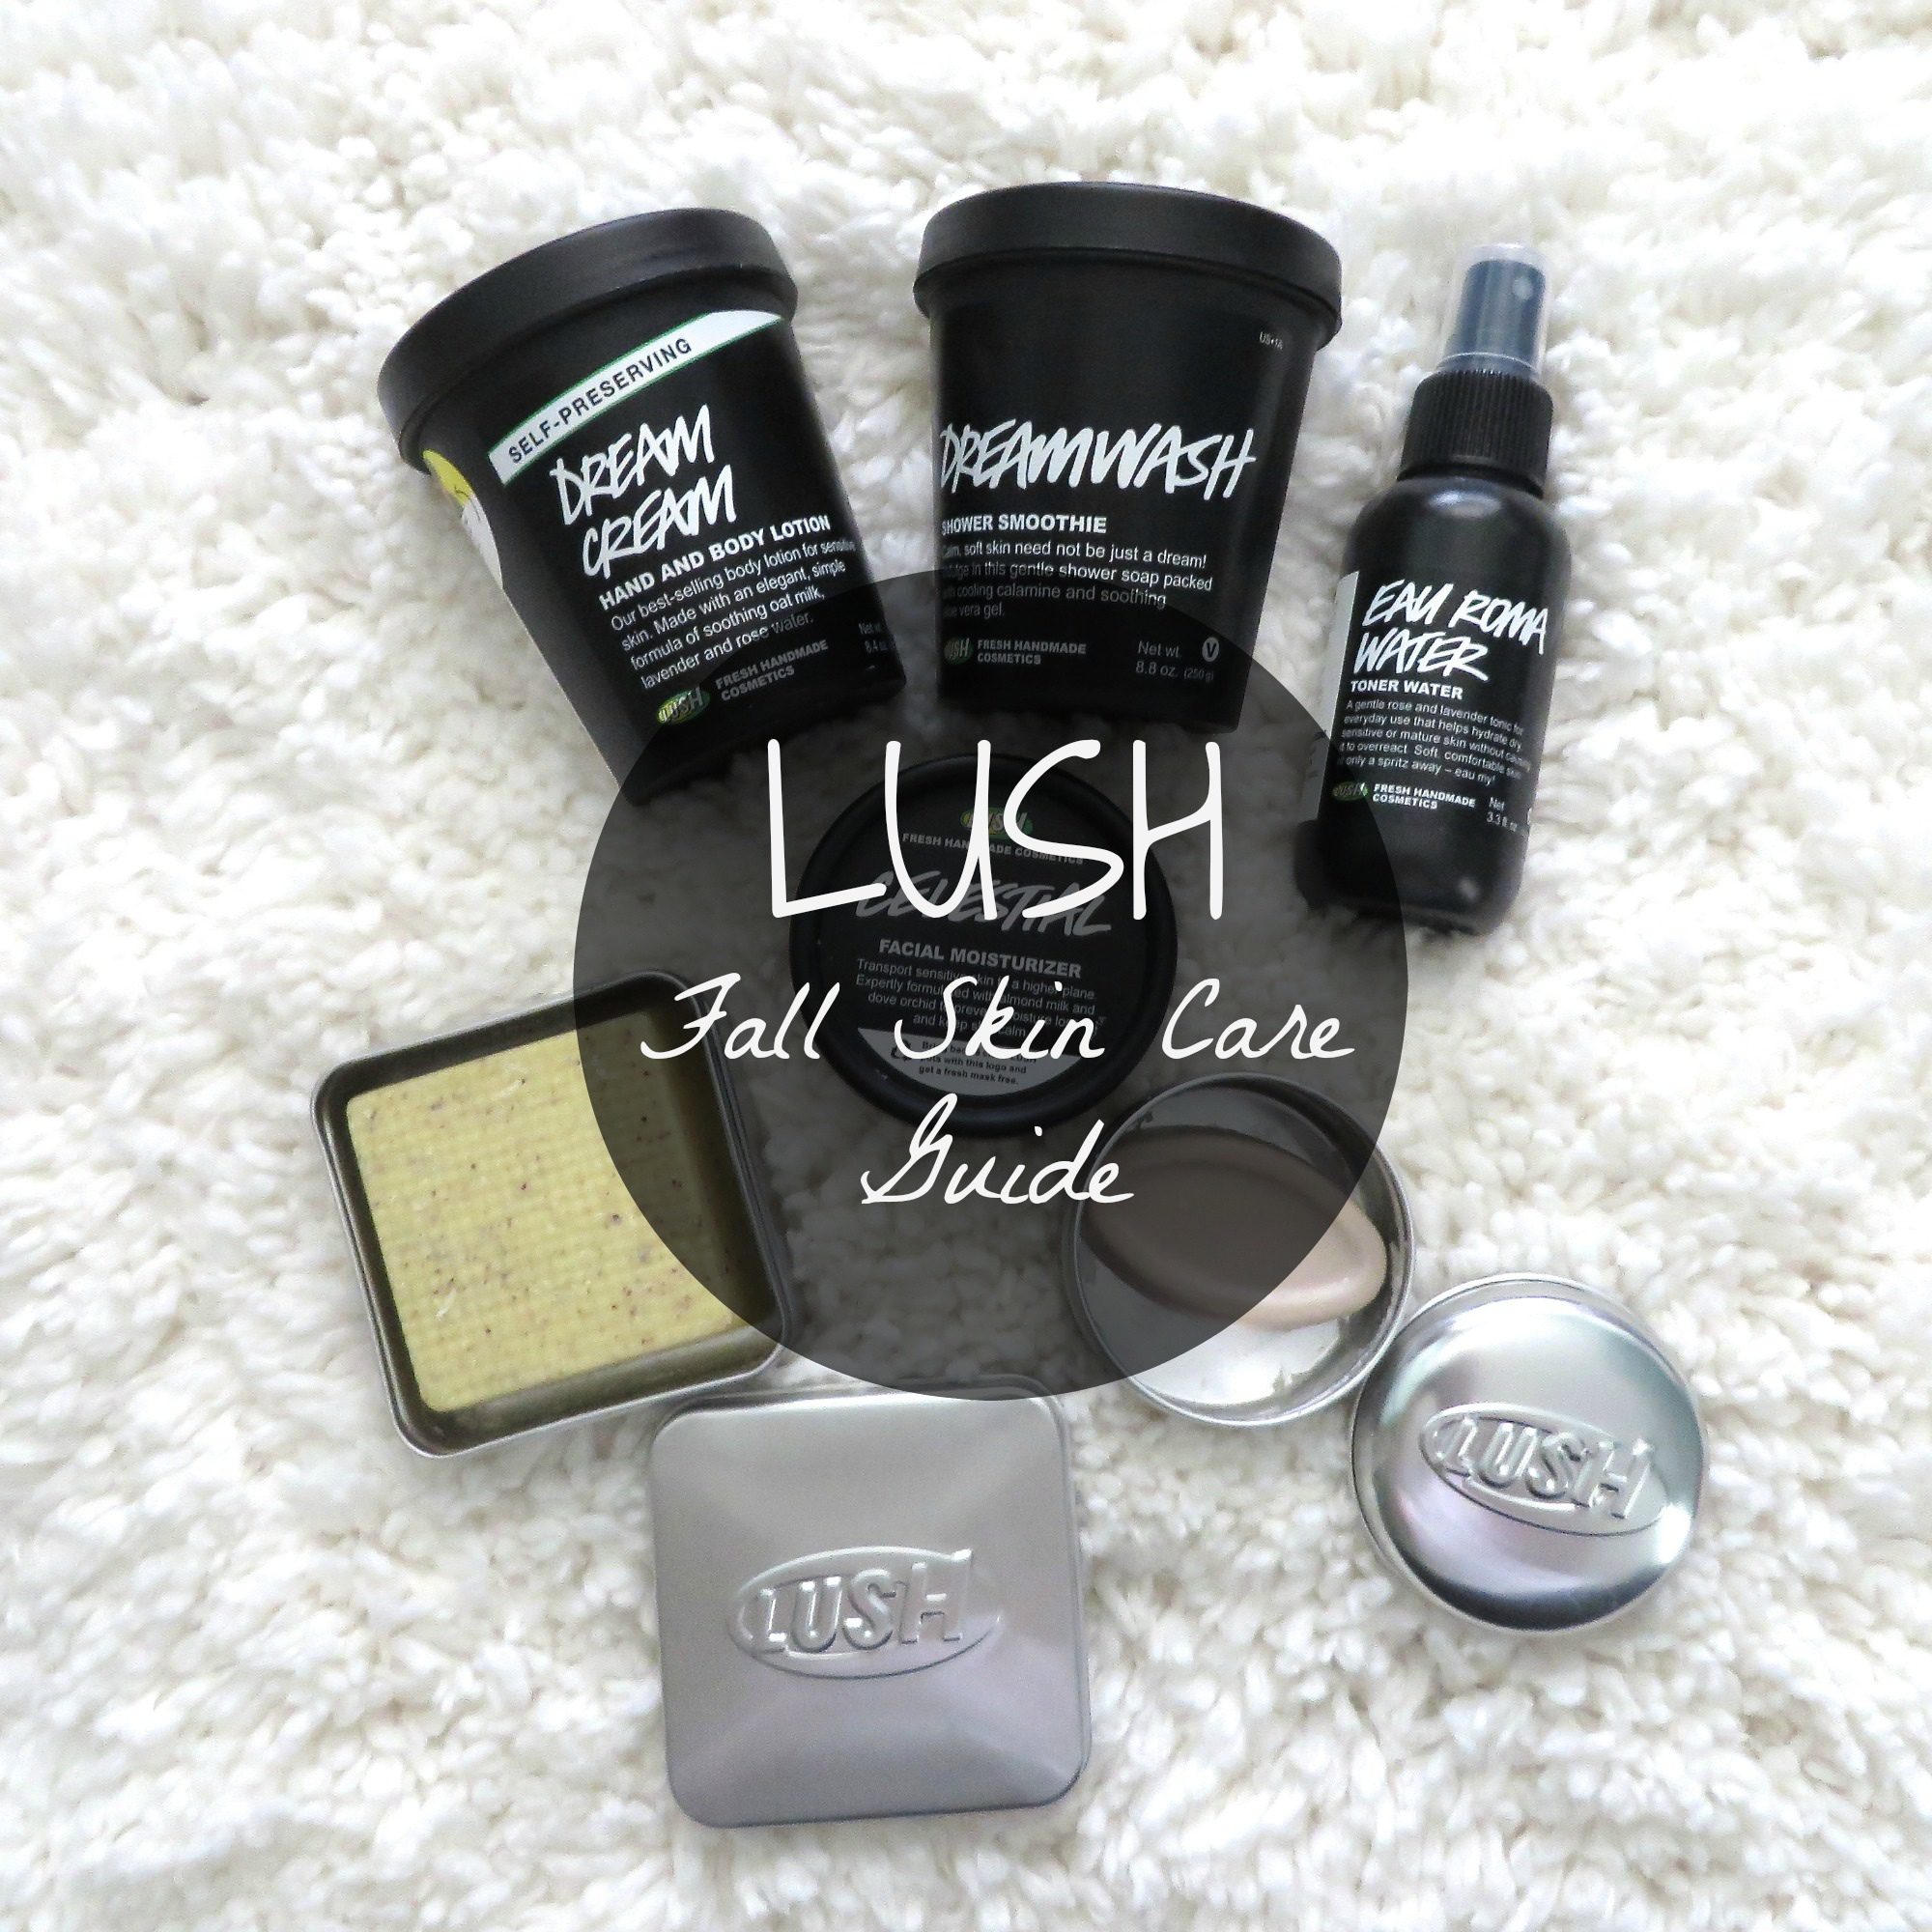 Best Lush products: Handmade soap, perfume, bath bombs, make-up and more